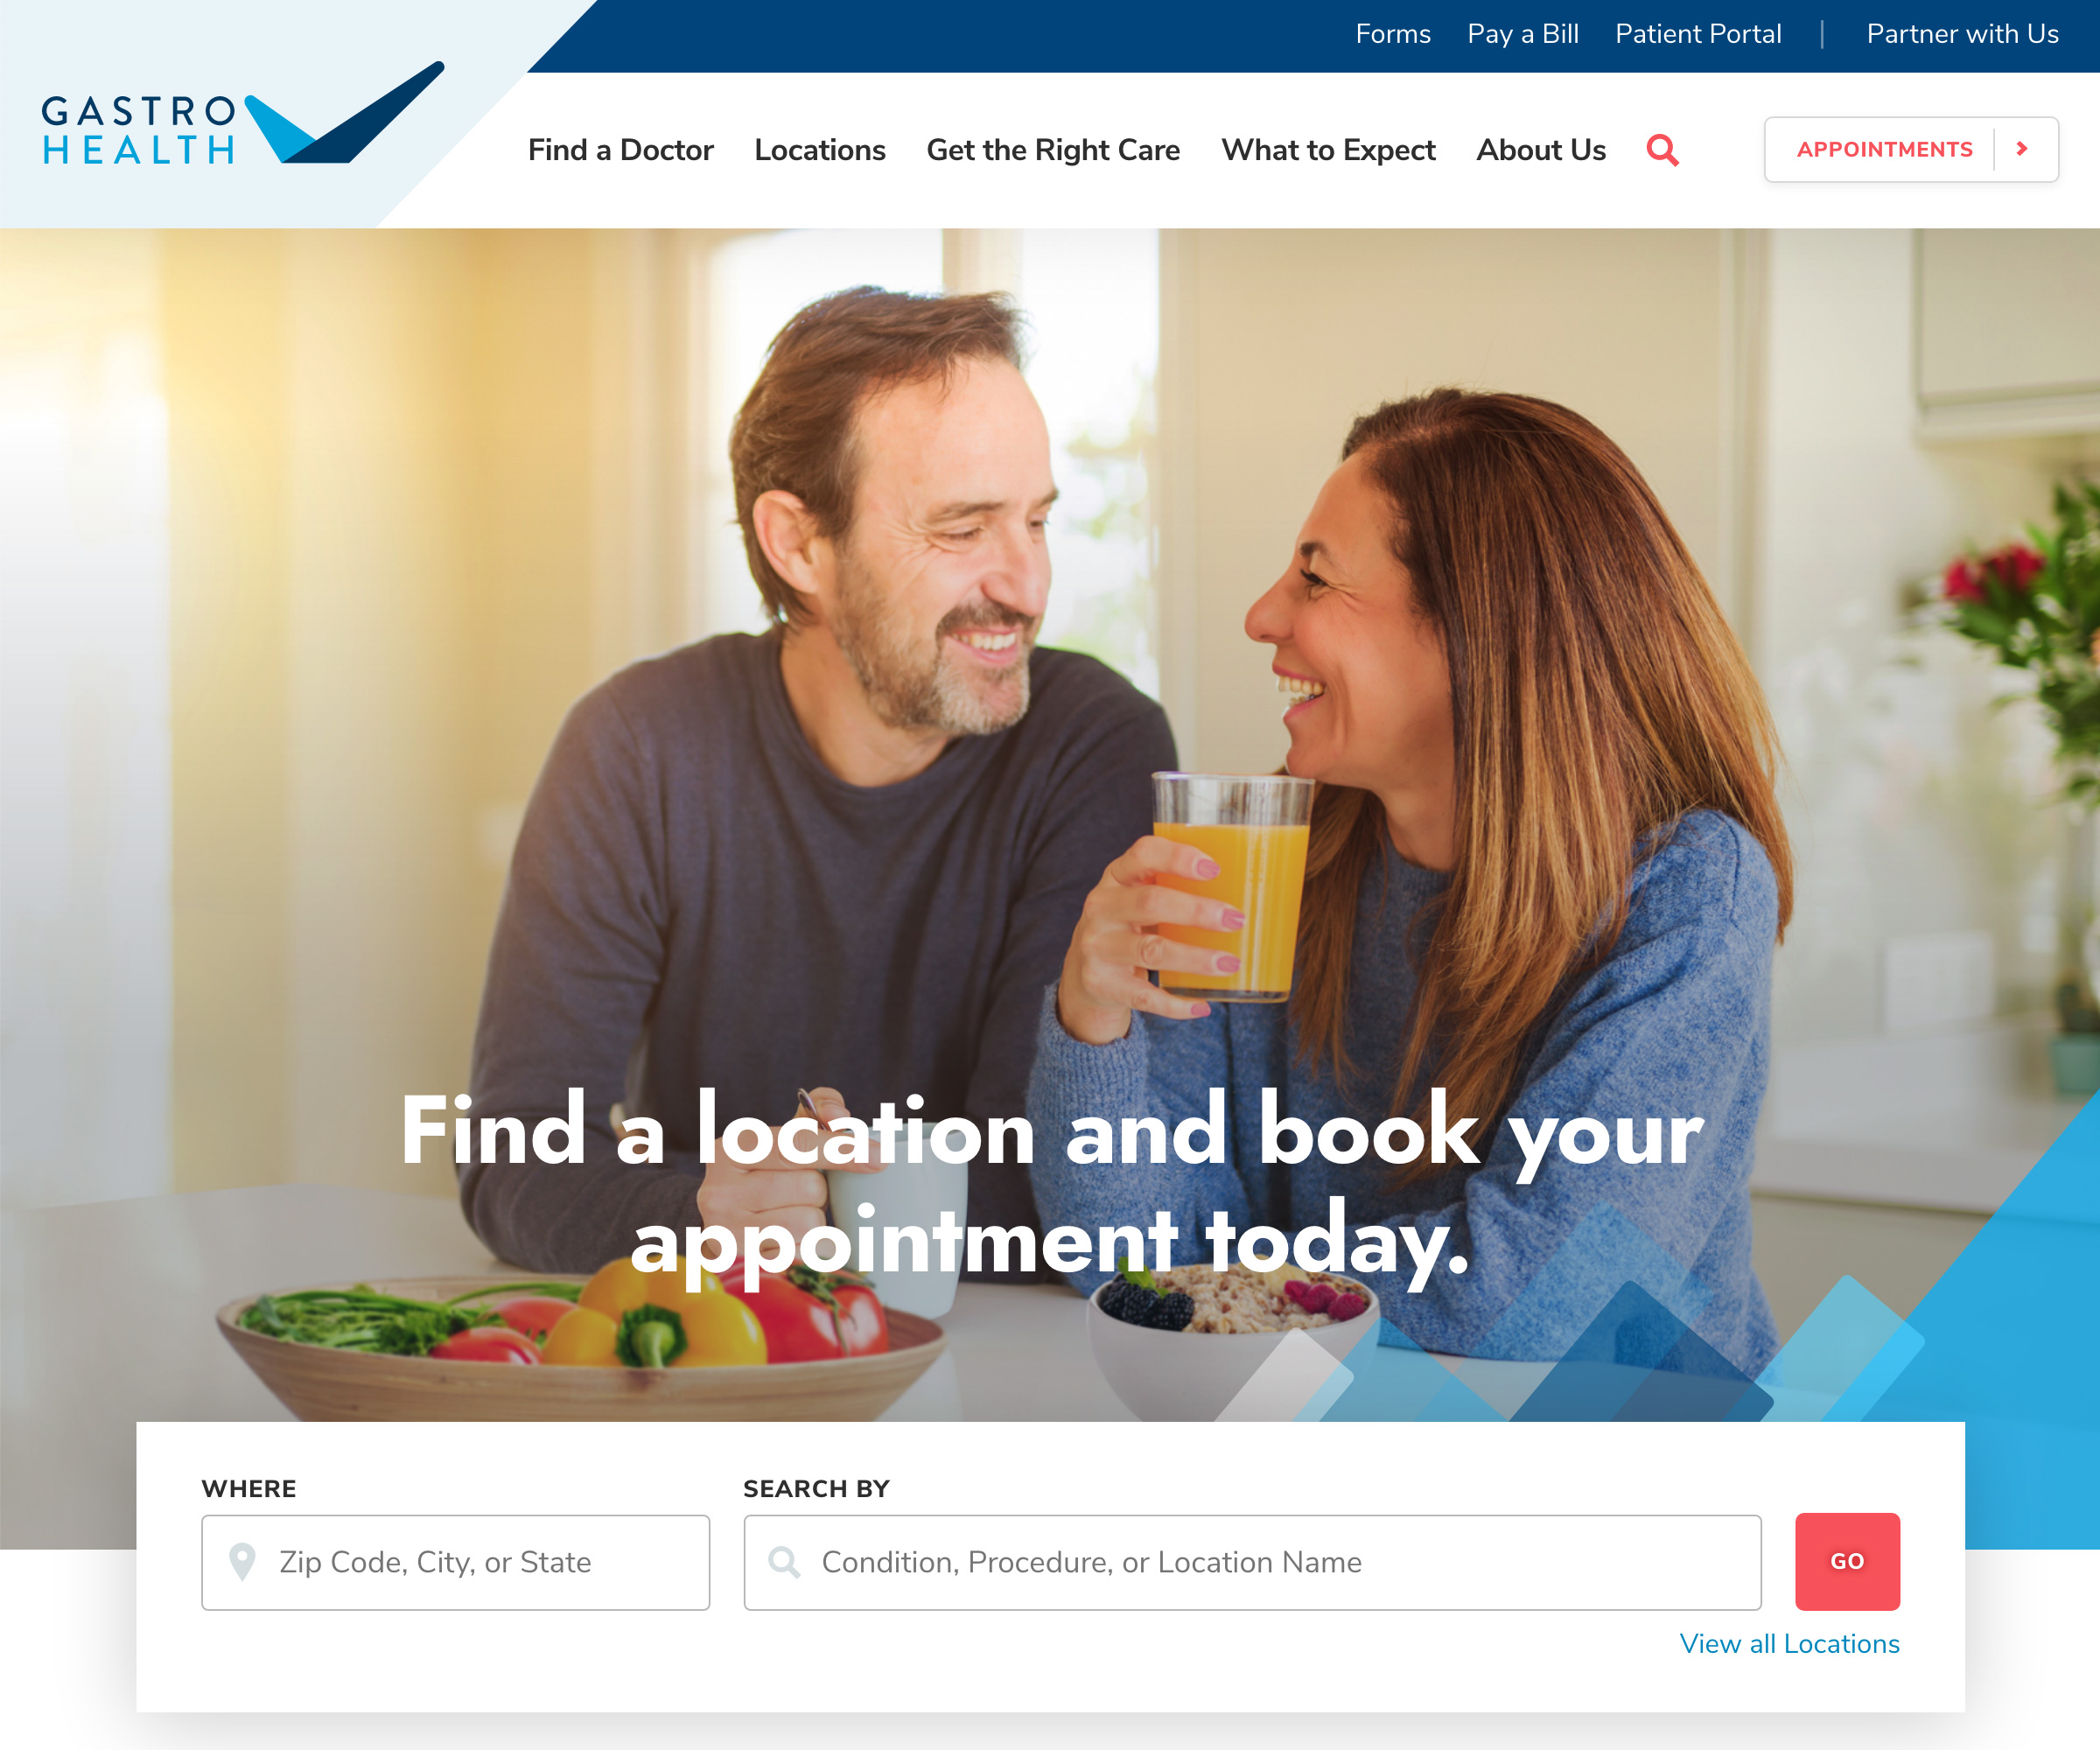 Image of the Gastro Health home page